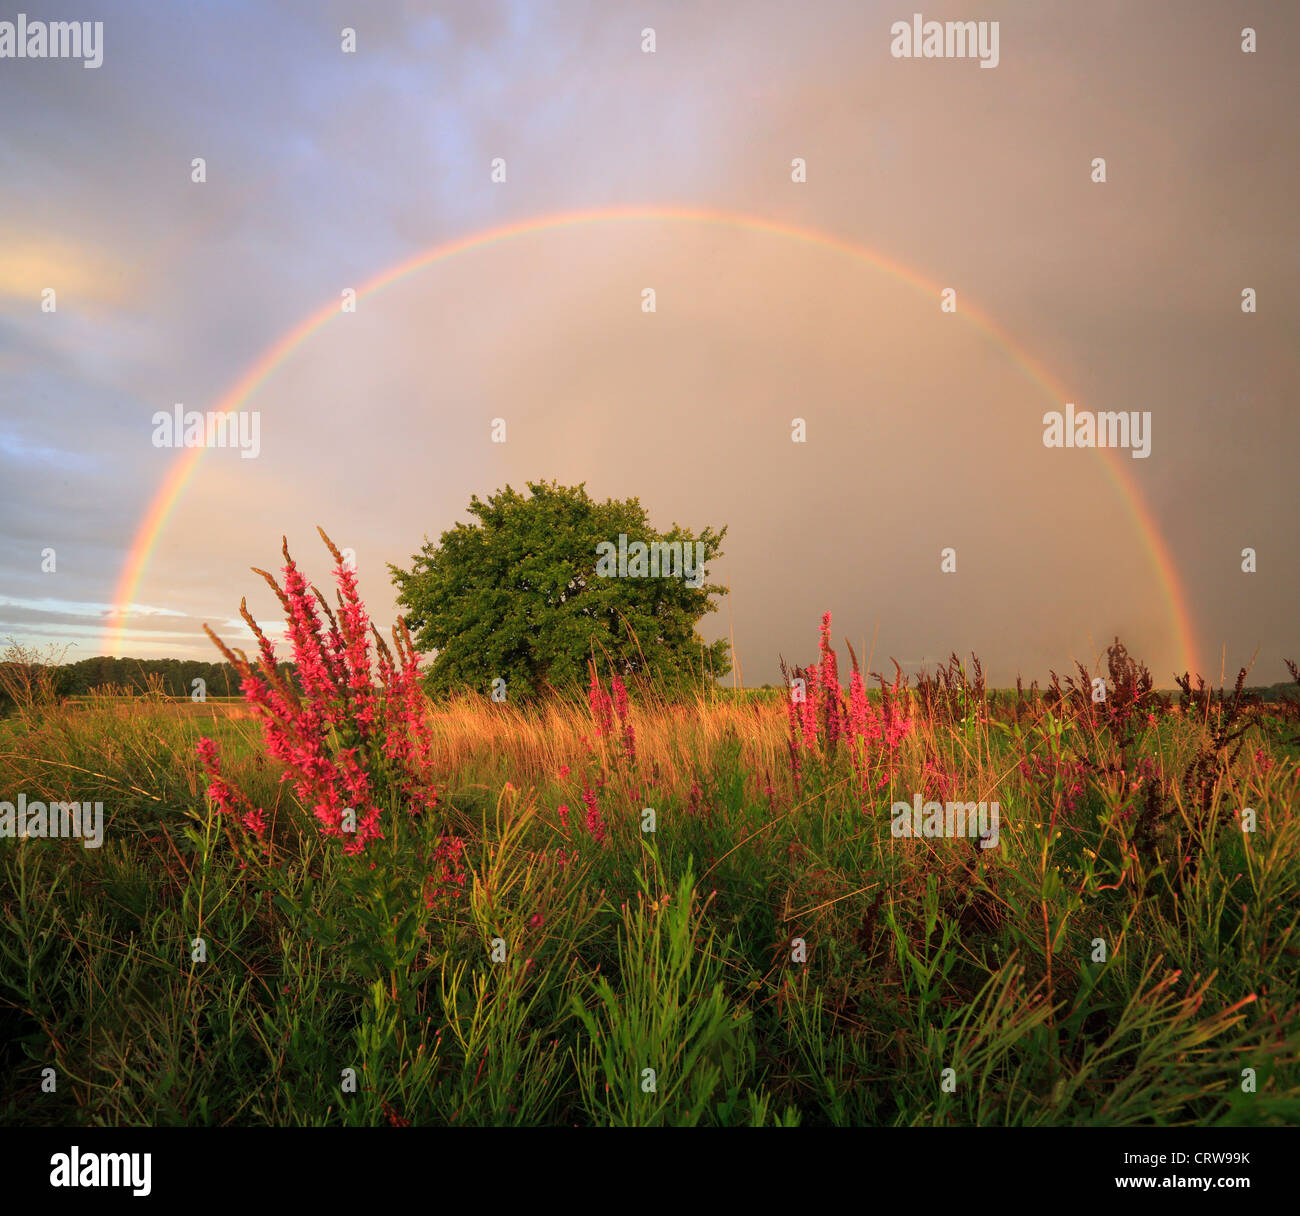 Tree under th rainbow in the sky, nature landscape Stock Photo